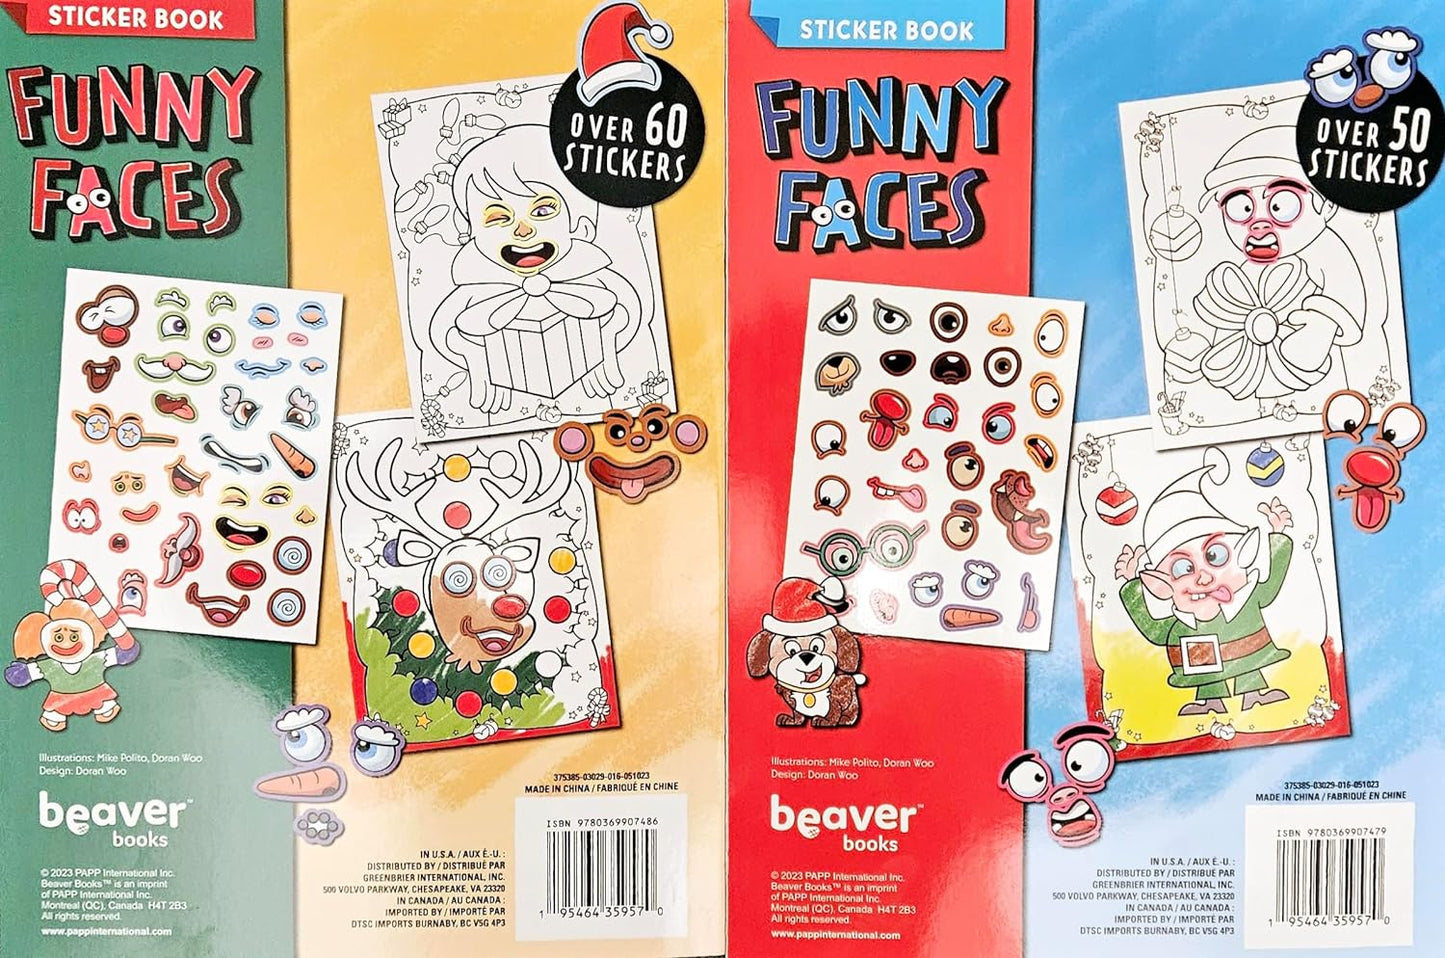 Christmas Funny Faces Sticker Book Set "Happy Holidays" & "Winter Fun"